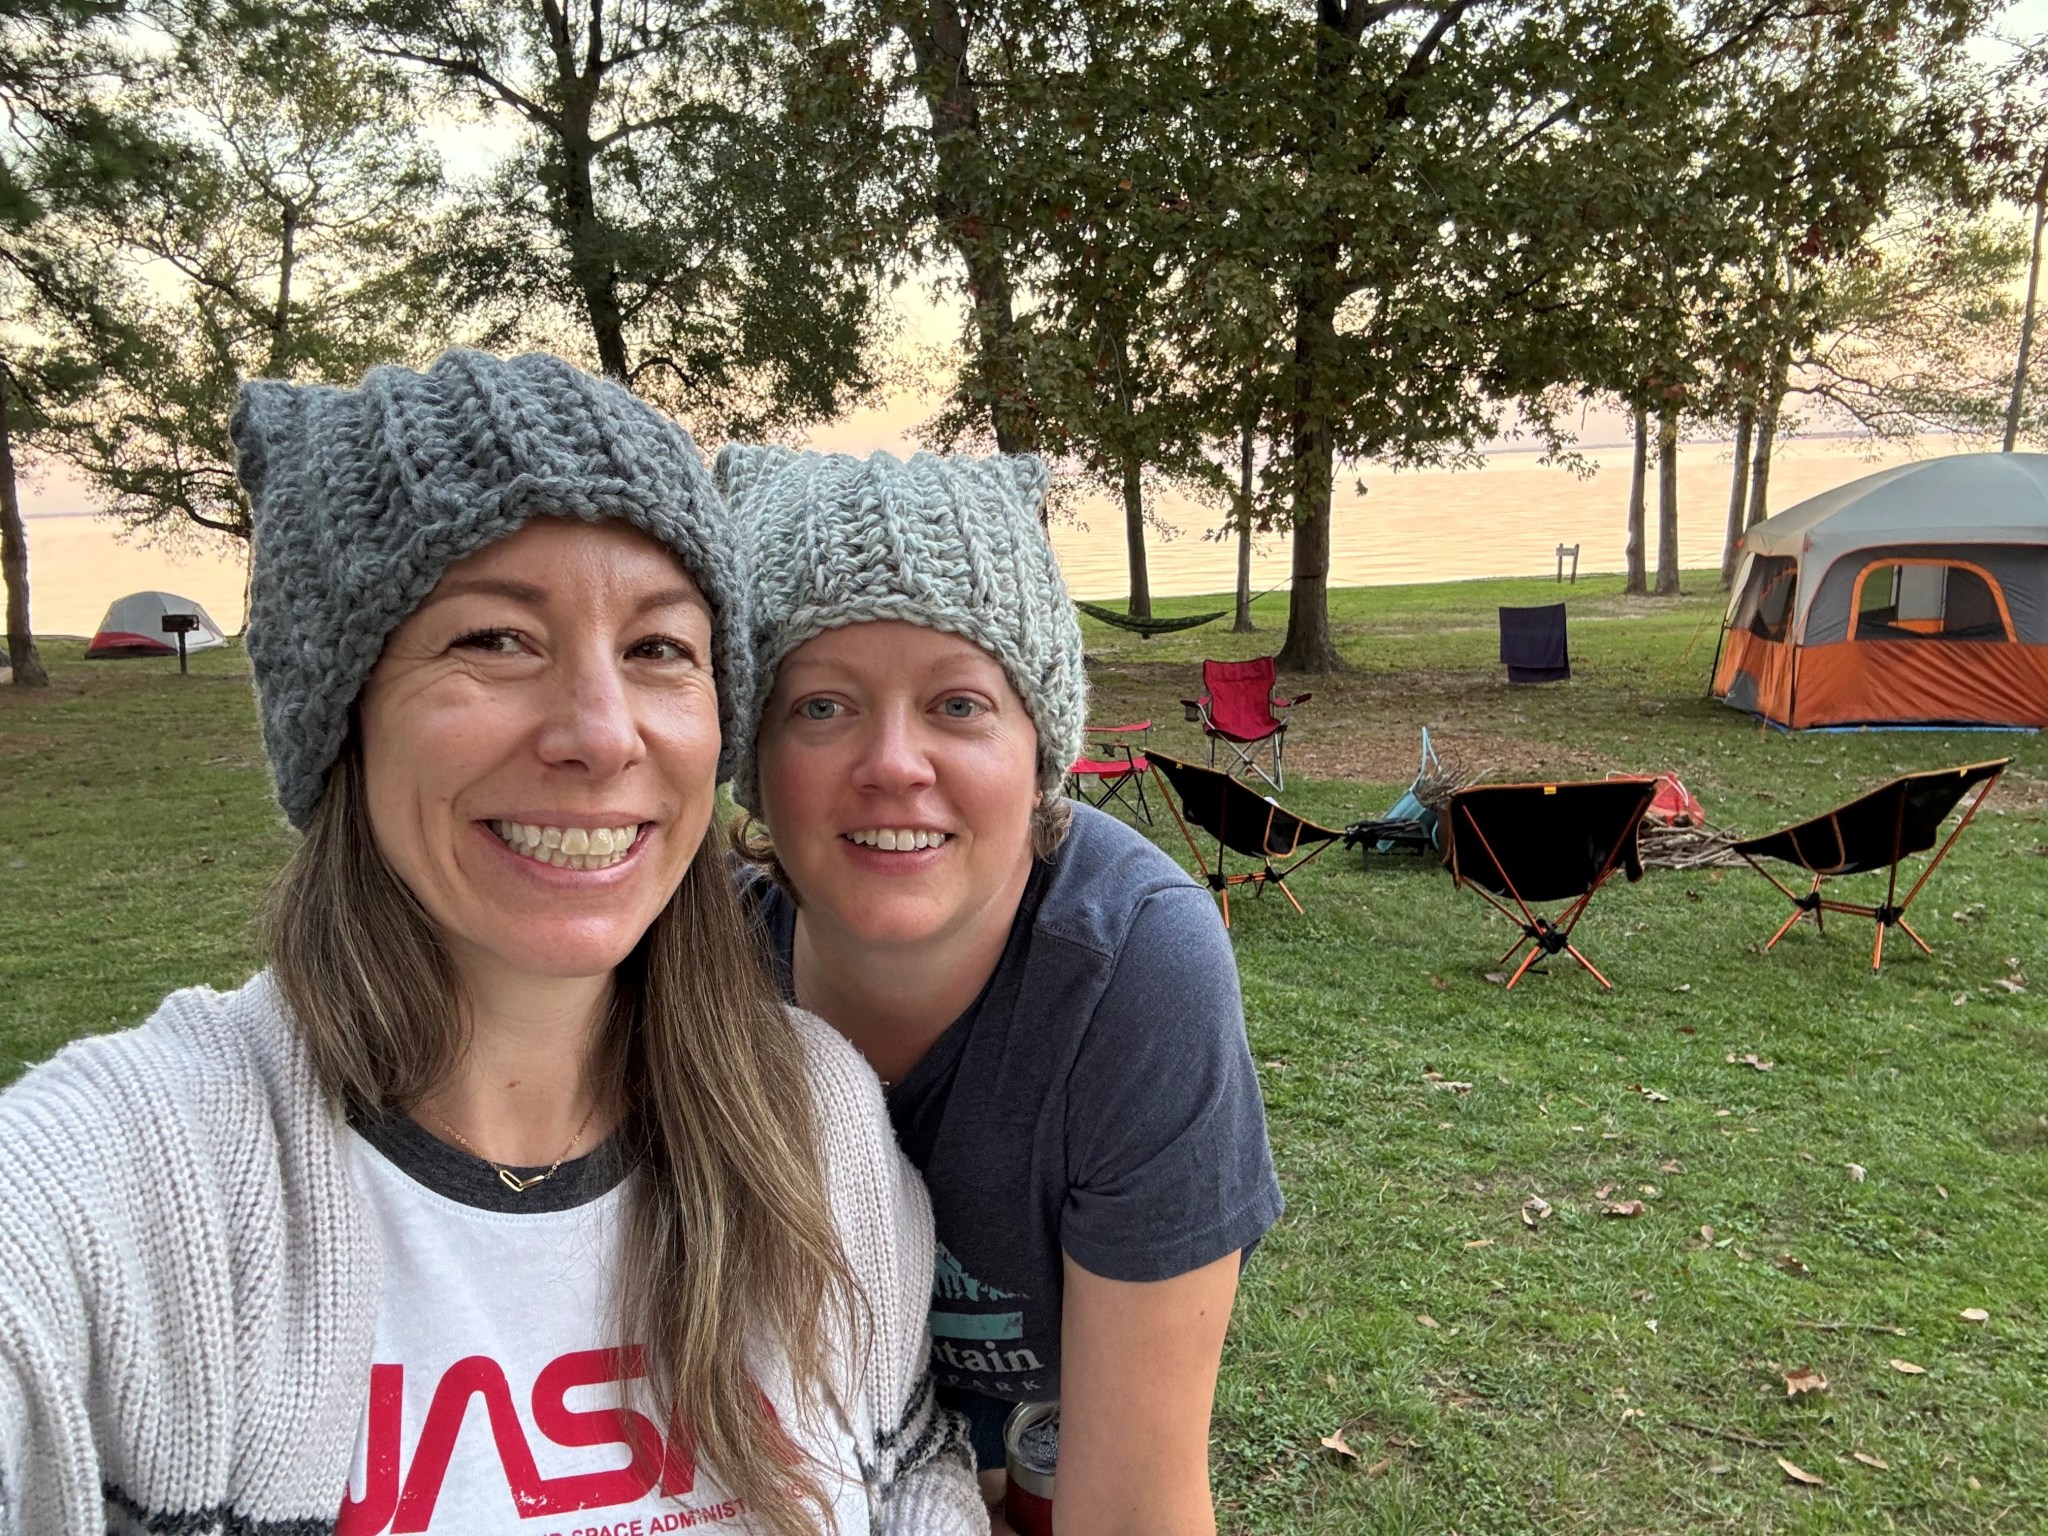 Two women wearing knit hats and t-shirts pose for a photo at a lakeside campsite.